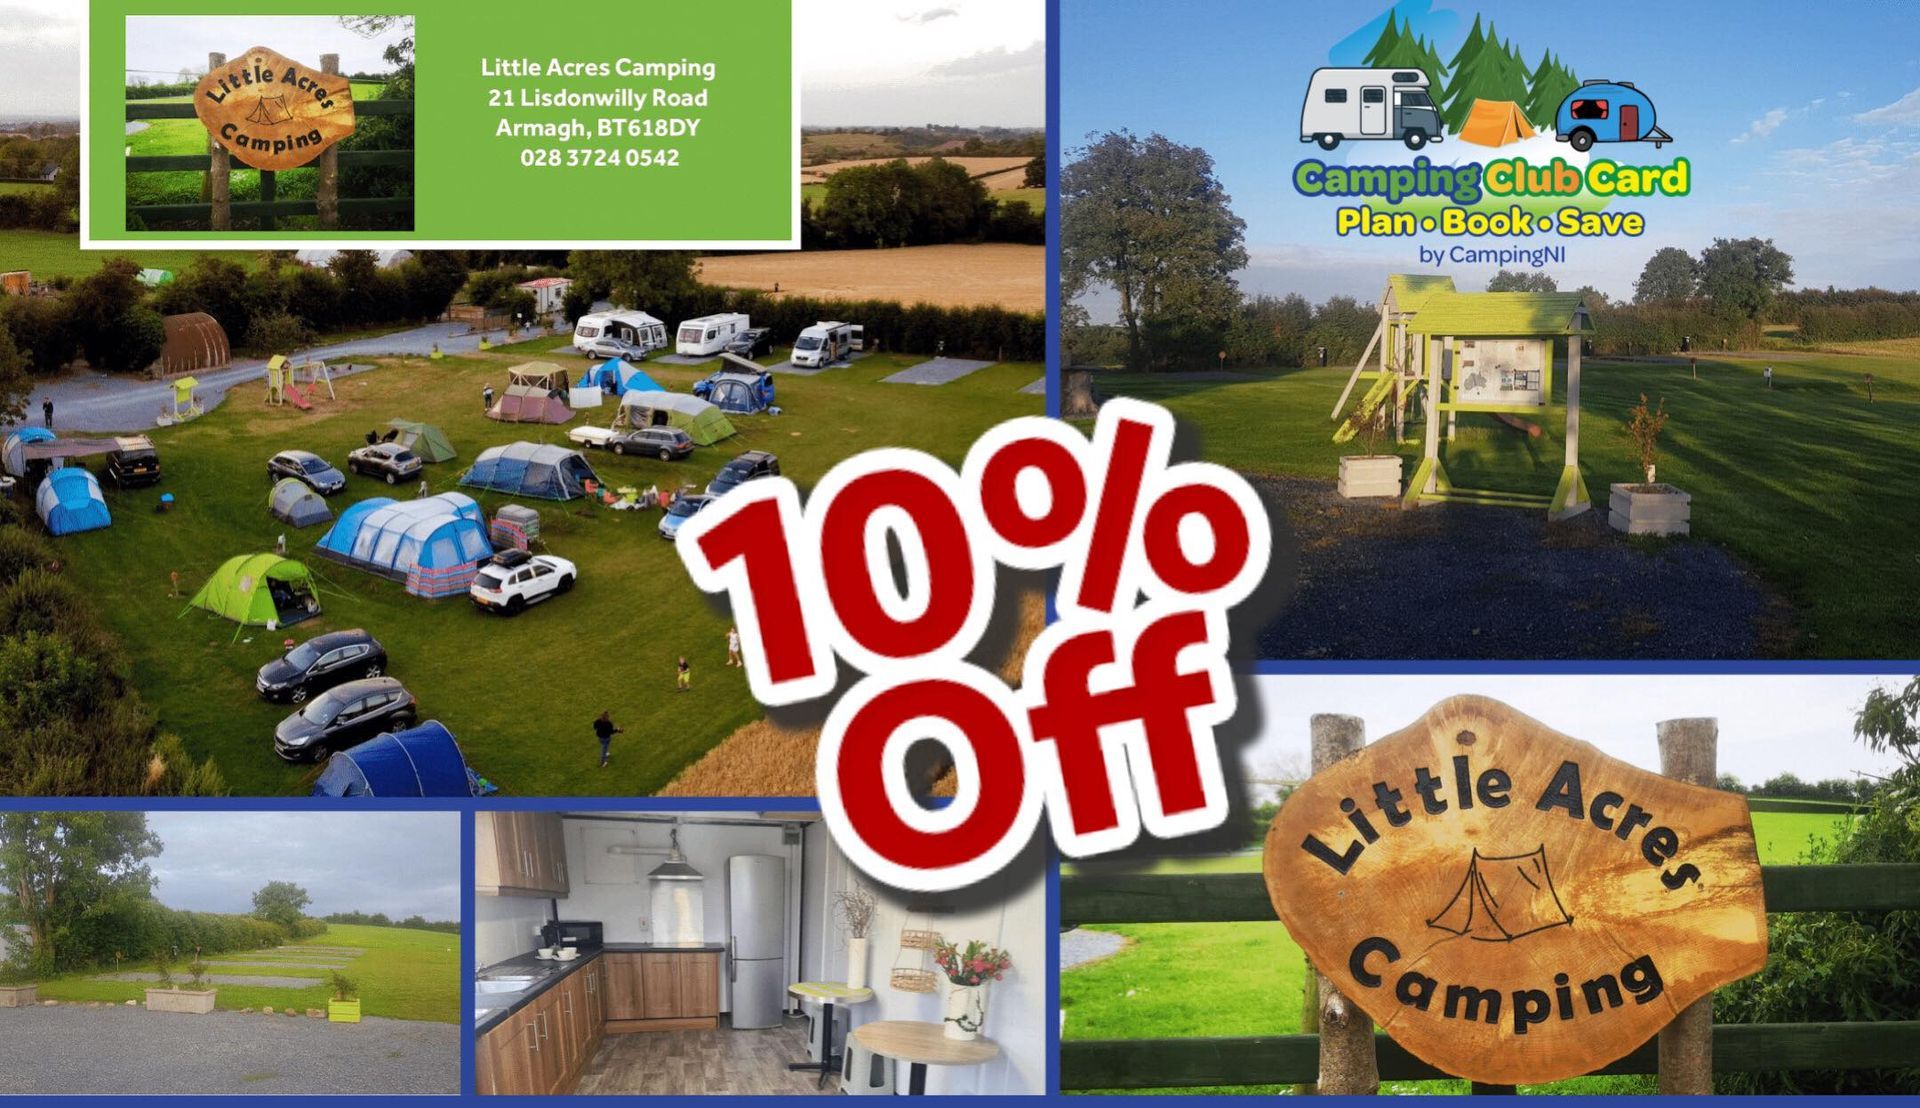 Little Acres Camping Camping Club Card by CampingNI members discount